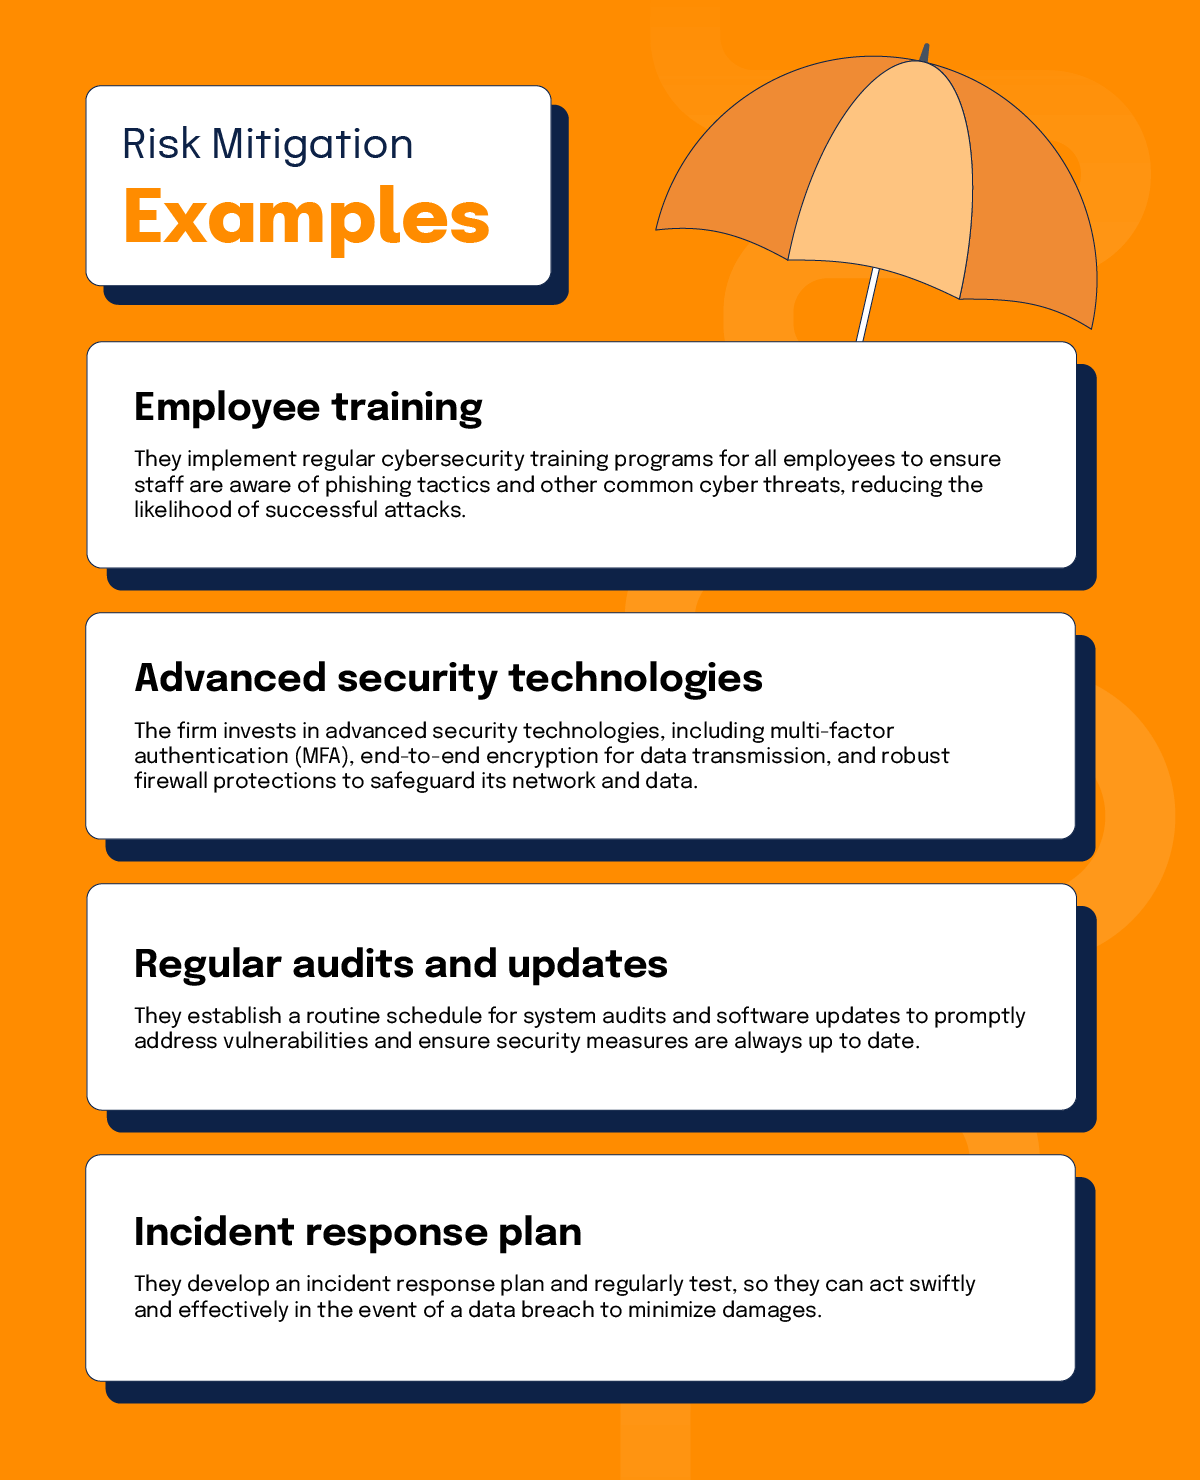 Examples of risk mitigation include employee training, advanced security technologies, regular audits and updates, and having an incident response plan